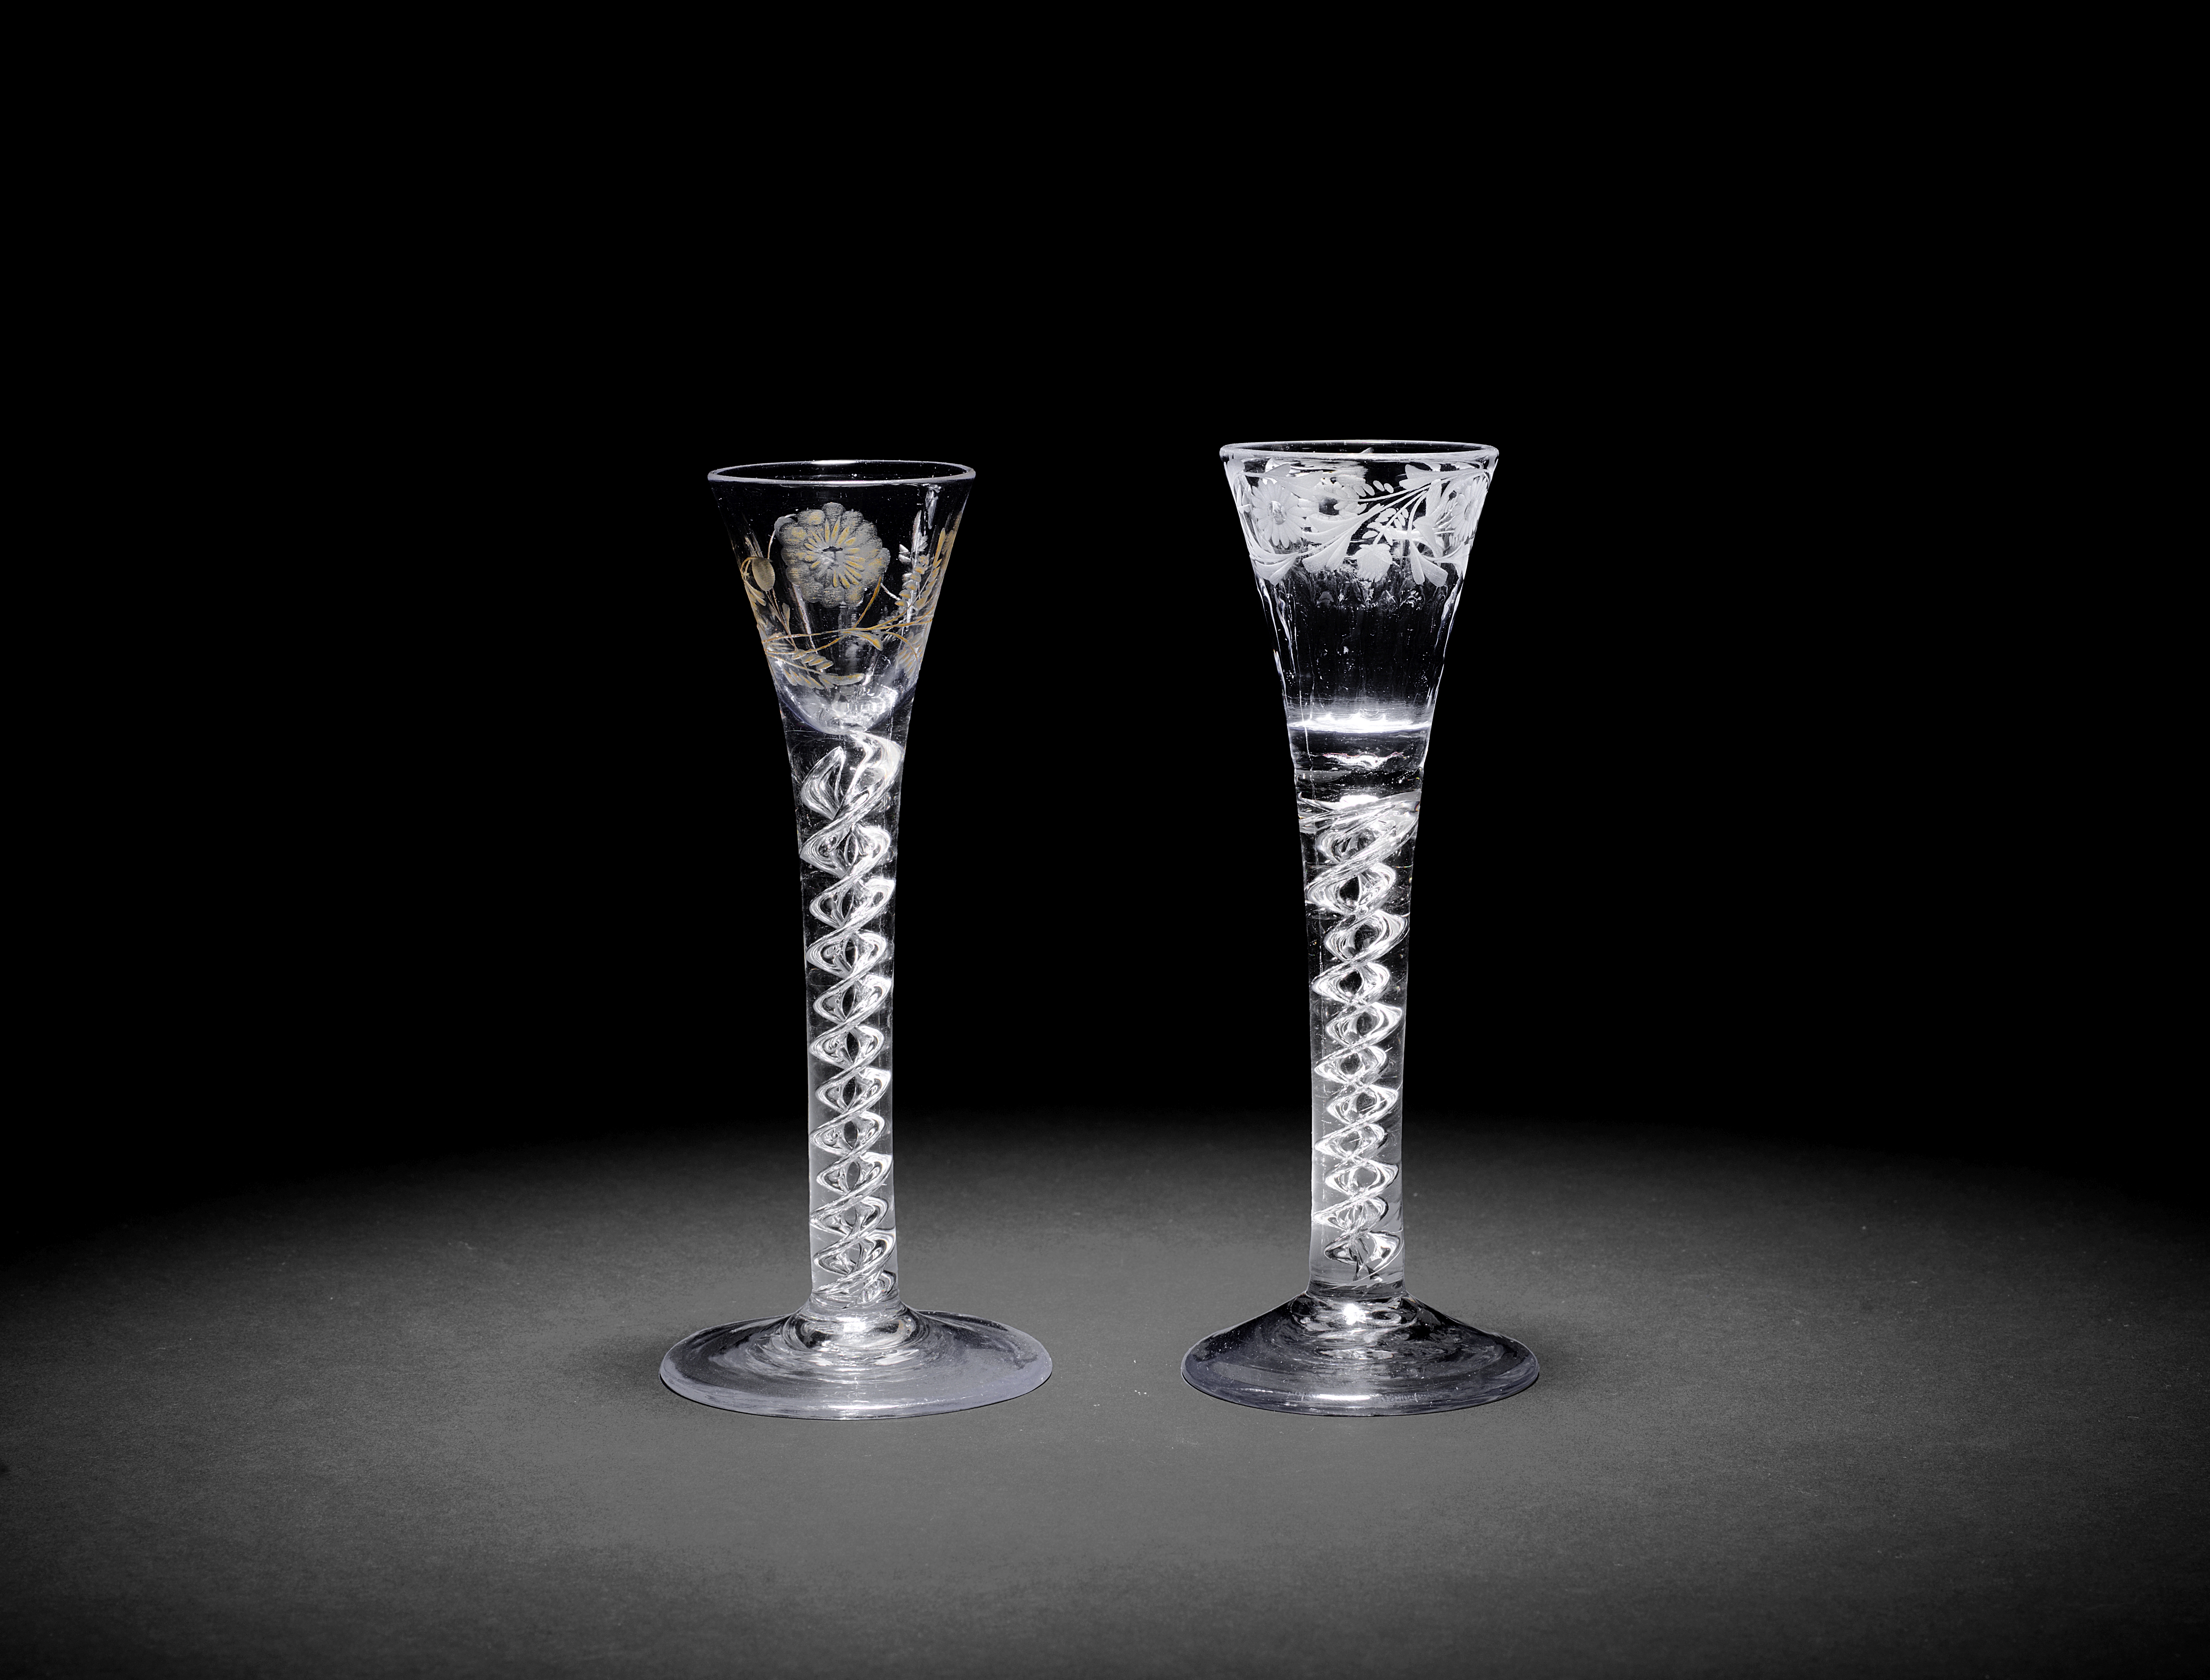 Two engraved airtwist cordial glasses, circa 1745-50